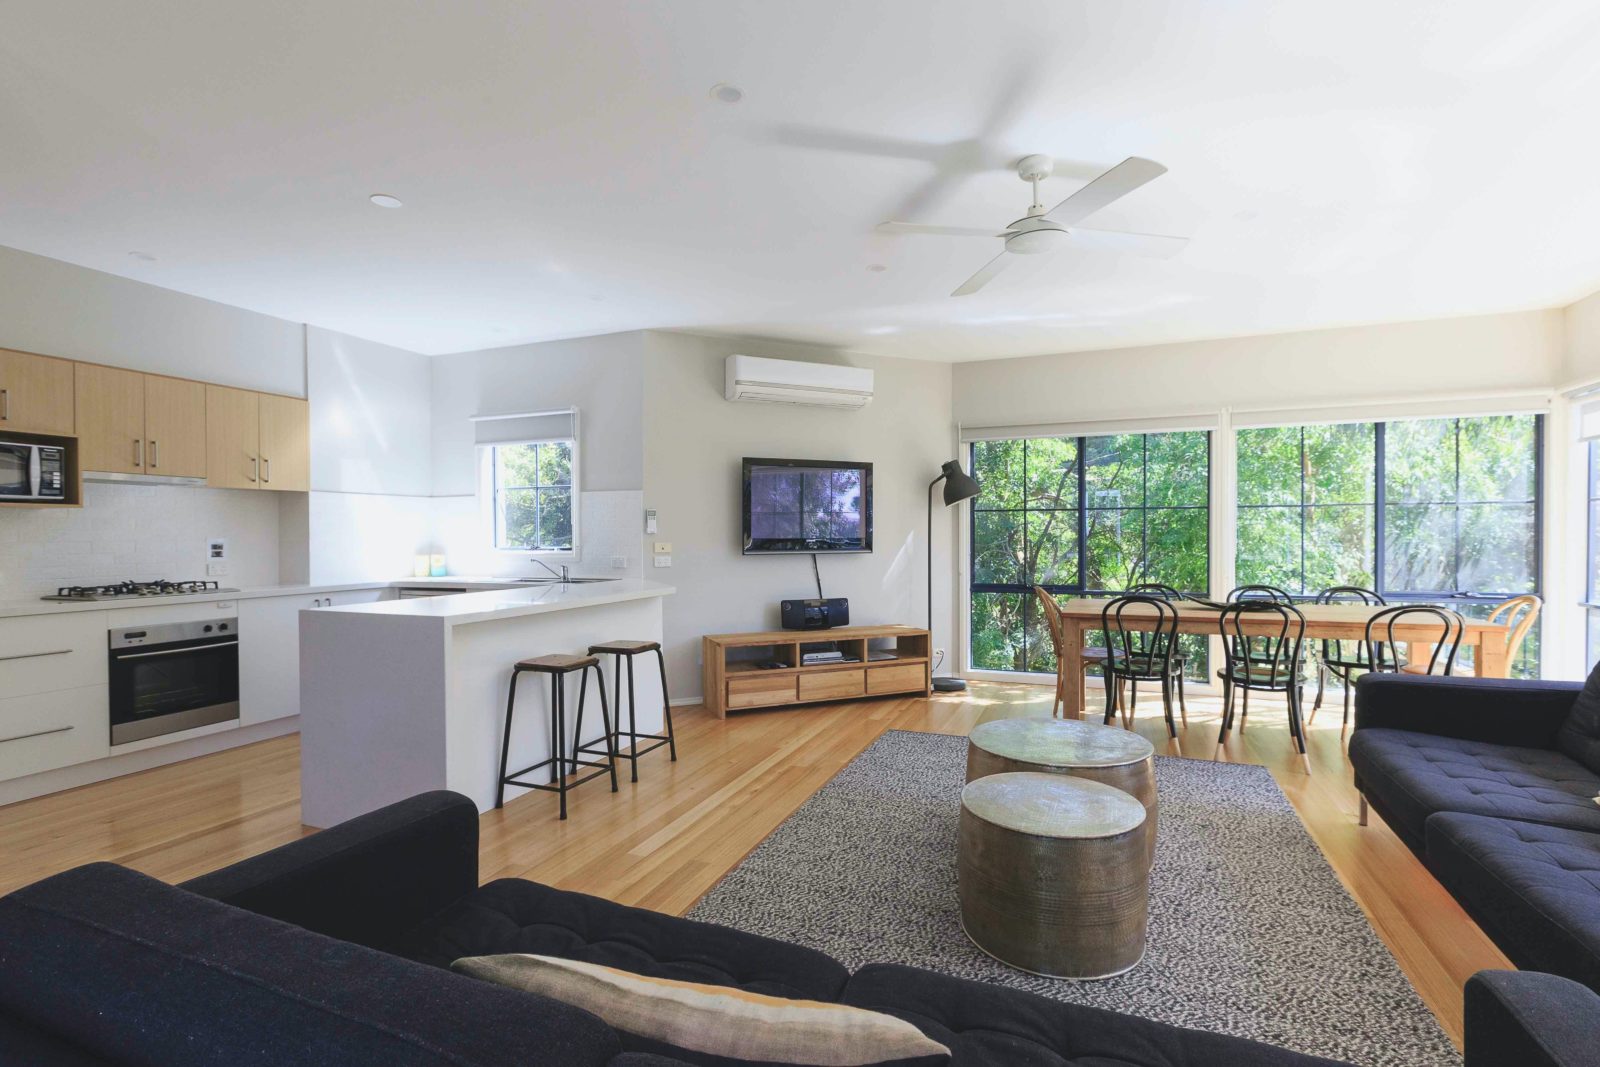 Great Ocean Road Holiday House accommodation for families Wye River Lorne